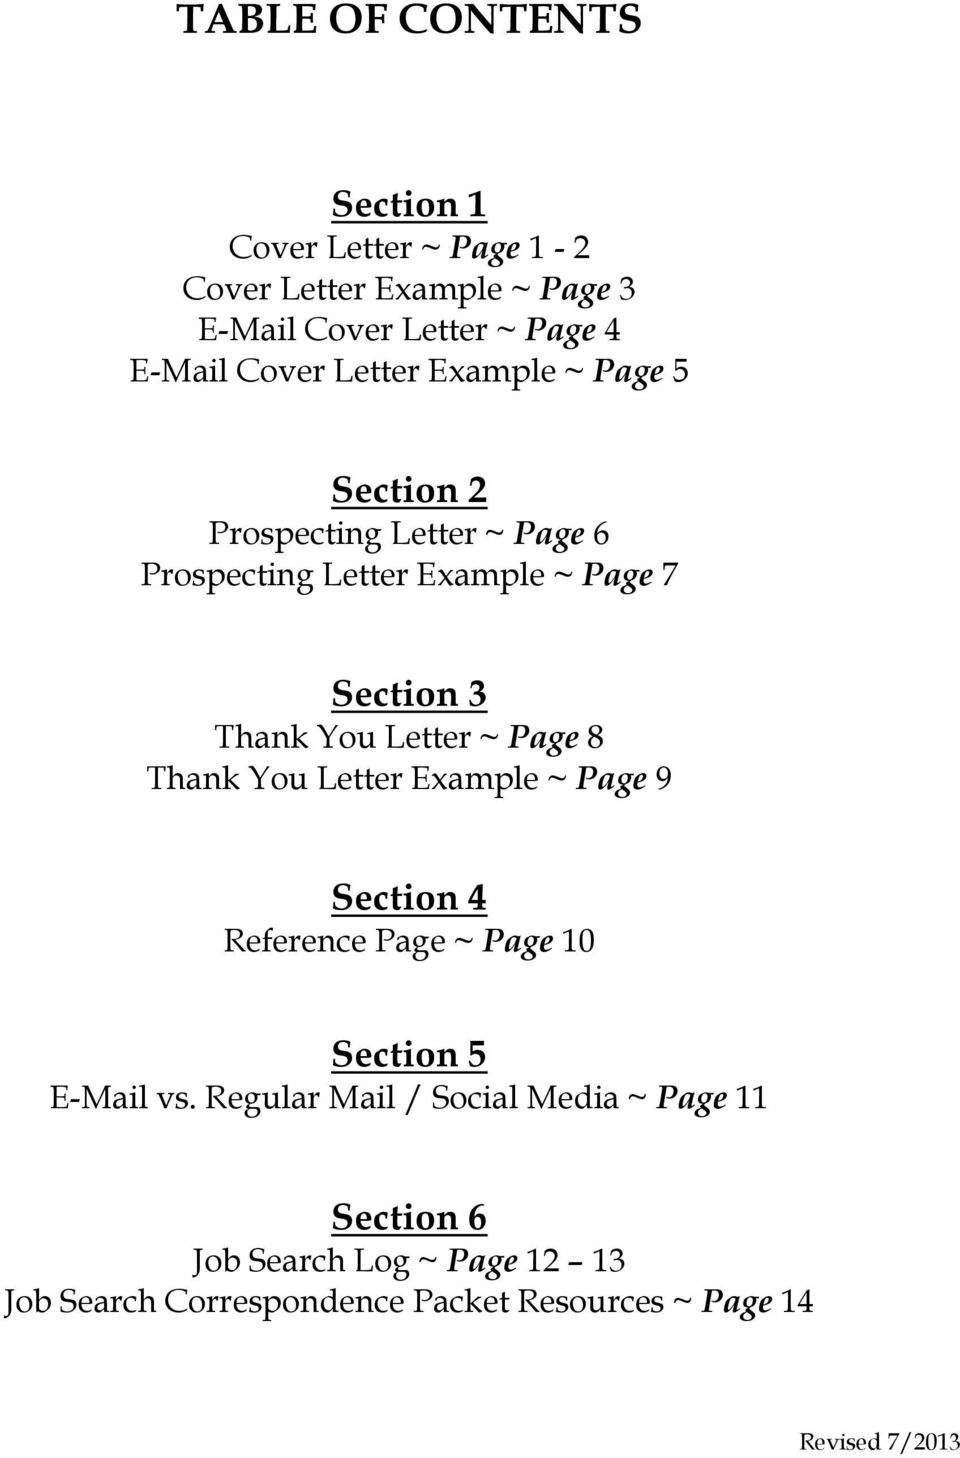 You Letter ~ Page 8 Thank You Letter Example ~ Page 9 Section 4 Reference Page ~ Page 10 Section 5 E-Mail vs.